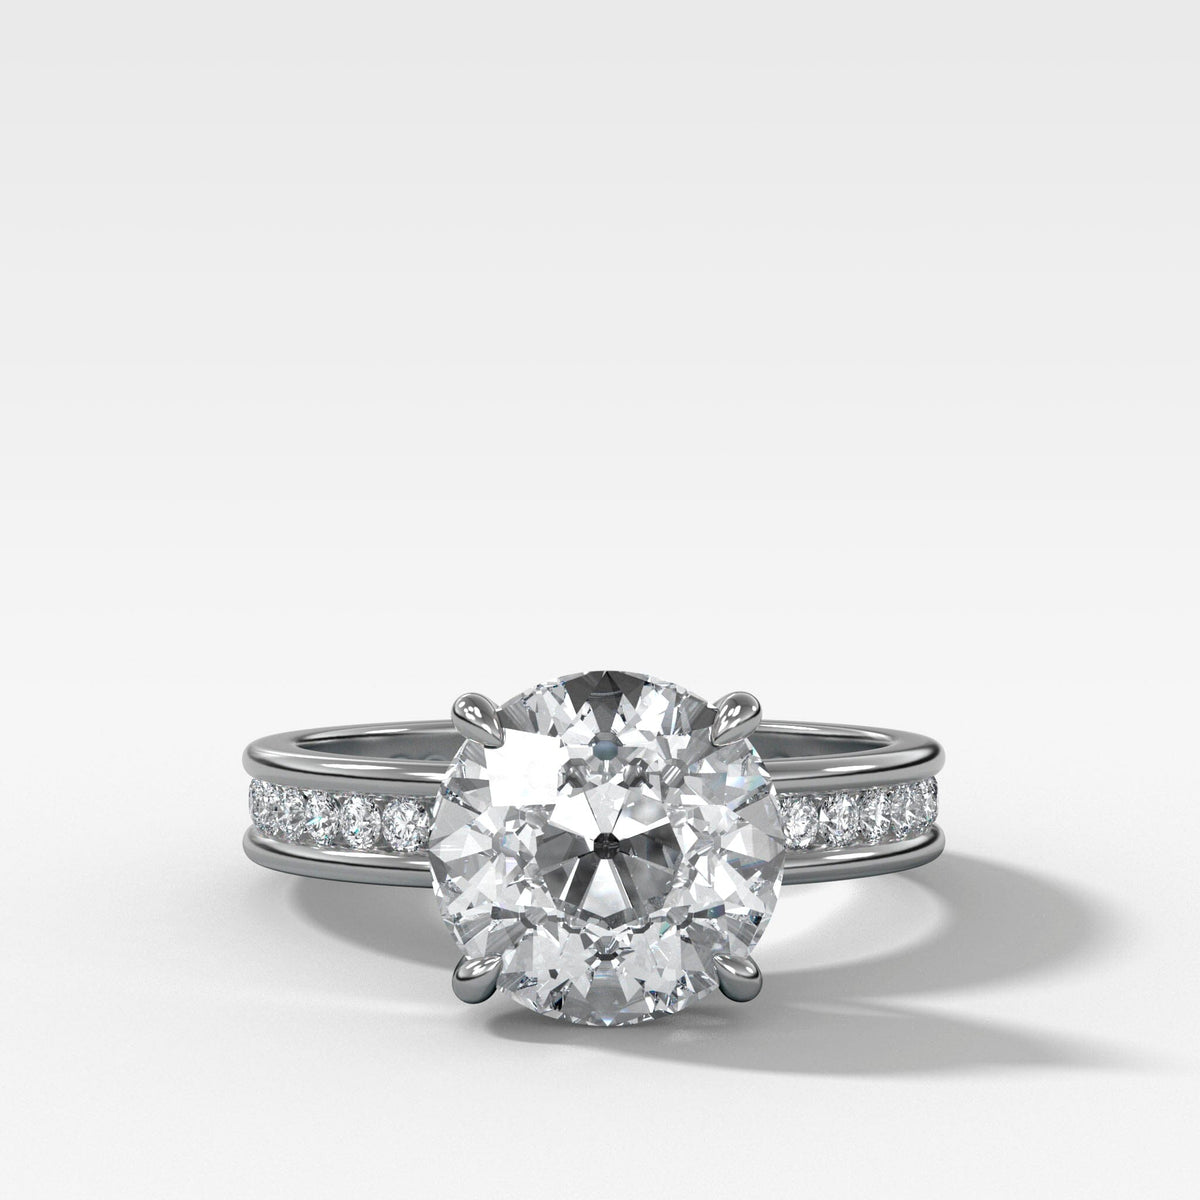 Petite Channel Set Solitaire Engagement Ring with Old Euro Cut Diamond Engagement Good Stone Inc White Gold 14k Natural